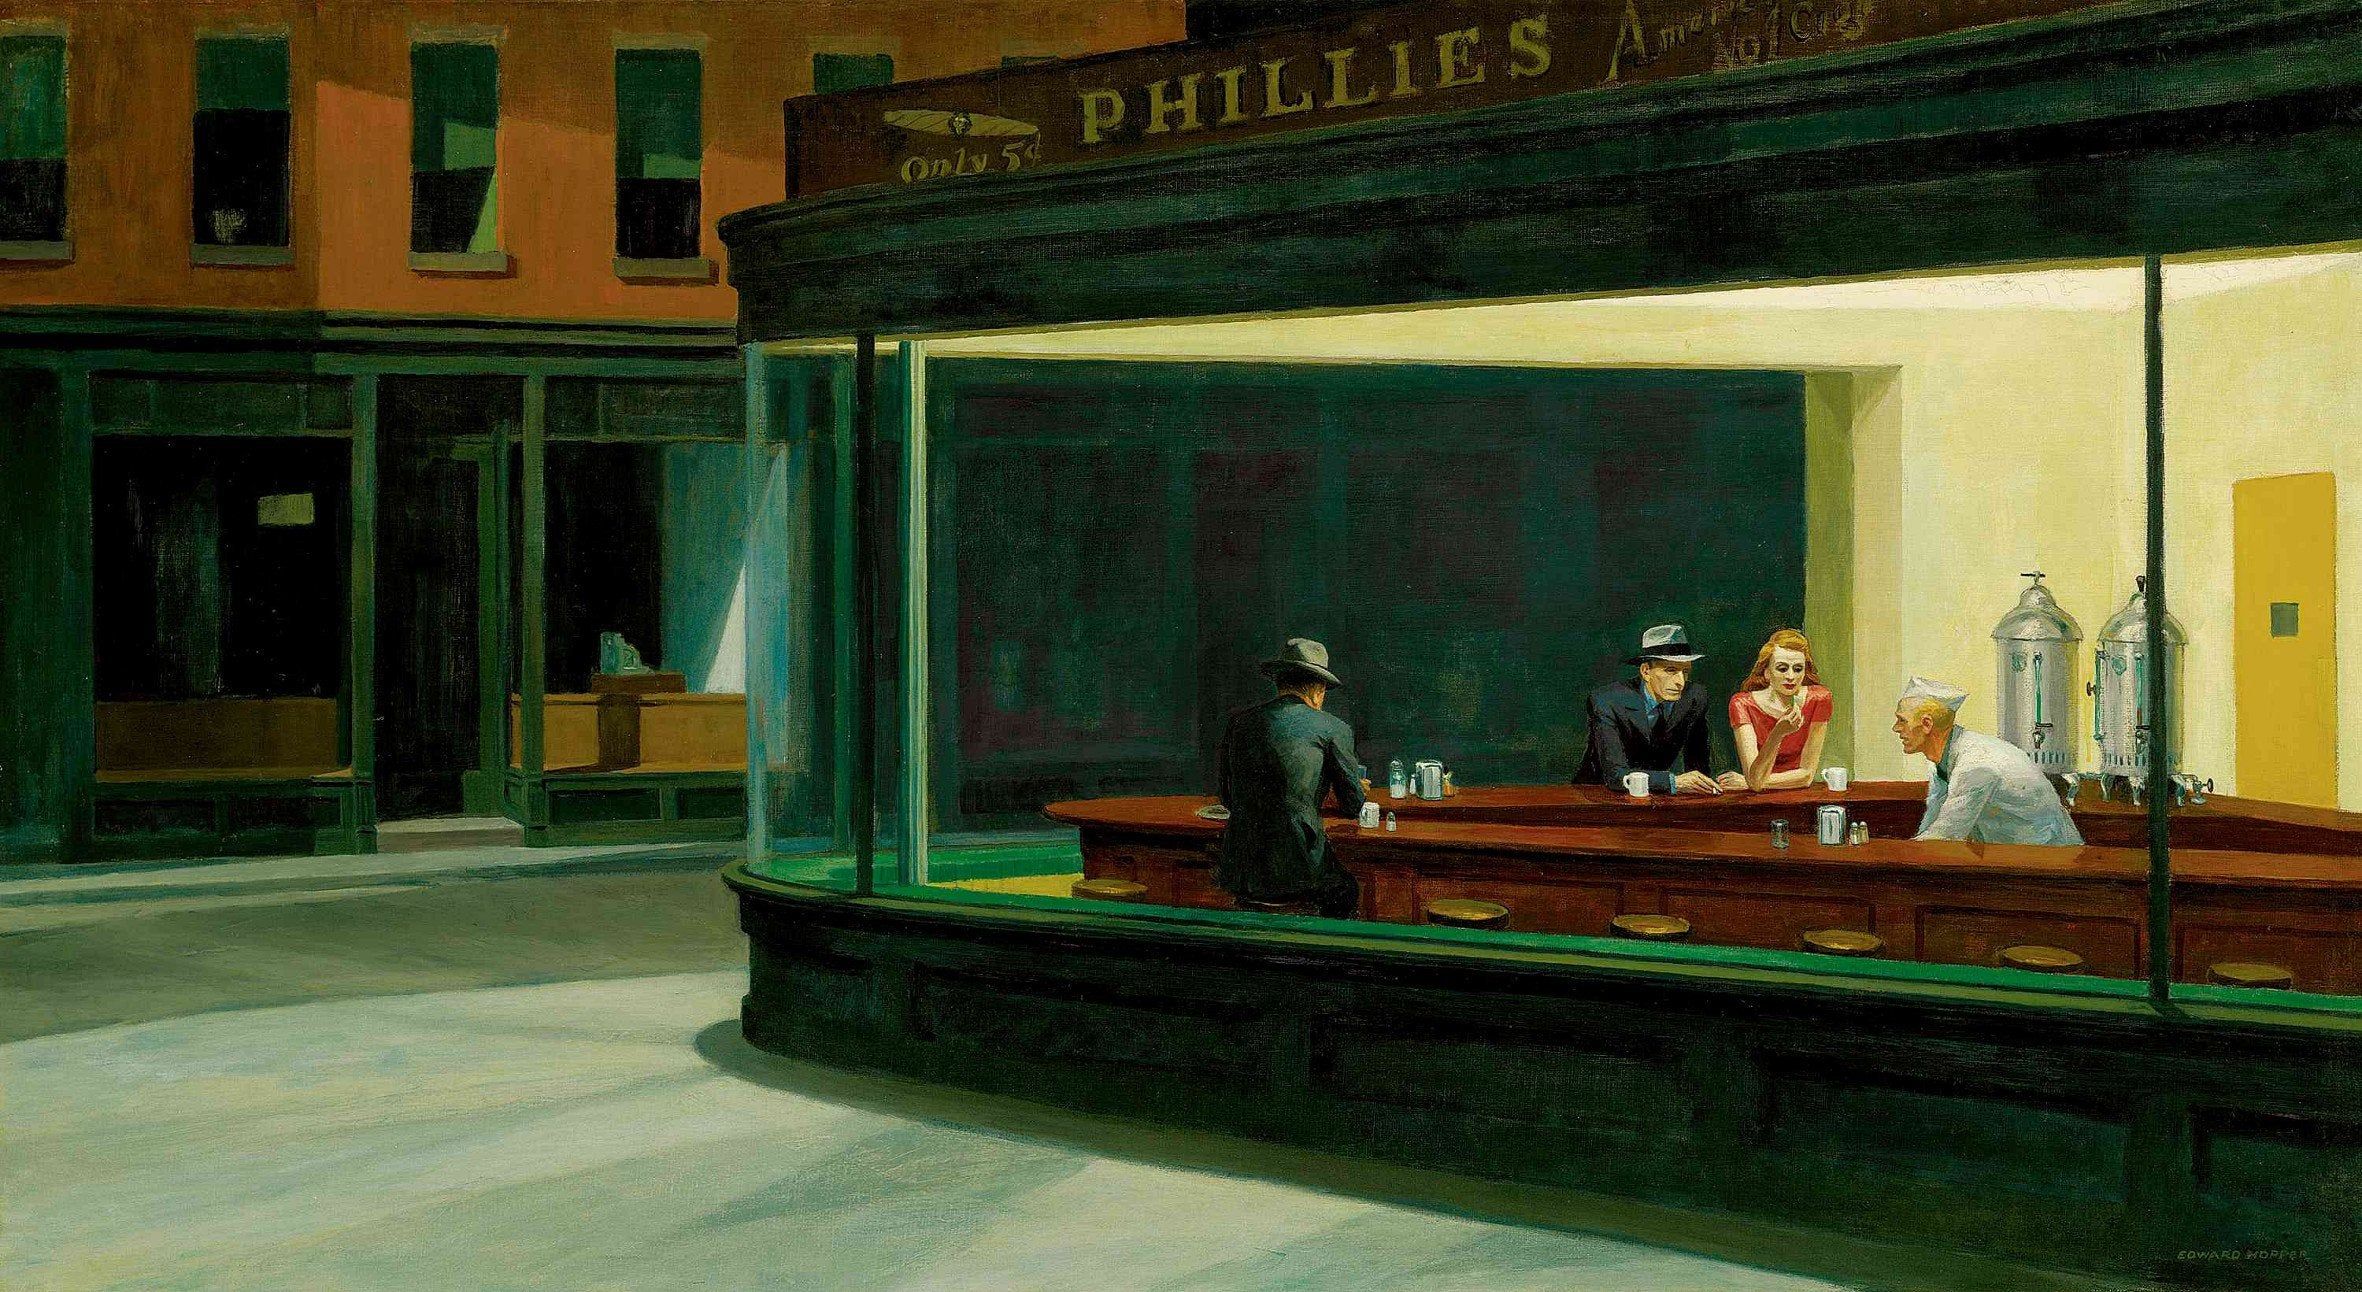 Nighthawks By Edward Hopper (1942) This Has Been My Go To Wallpaper For Years